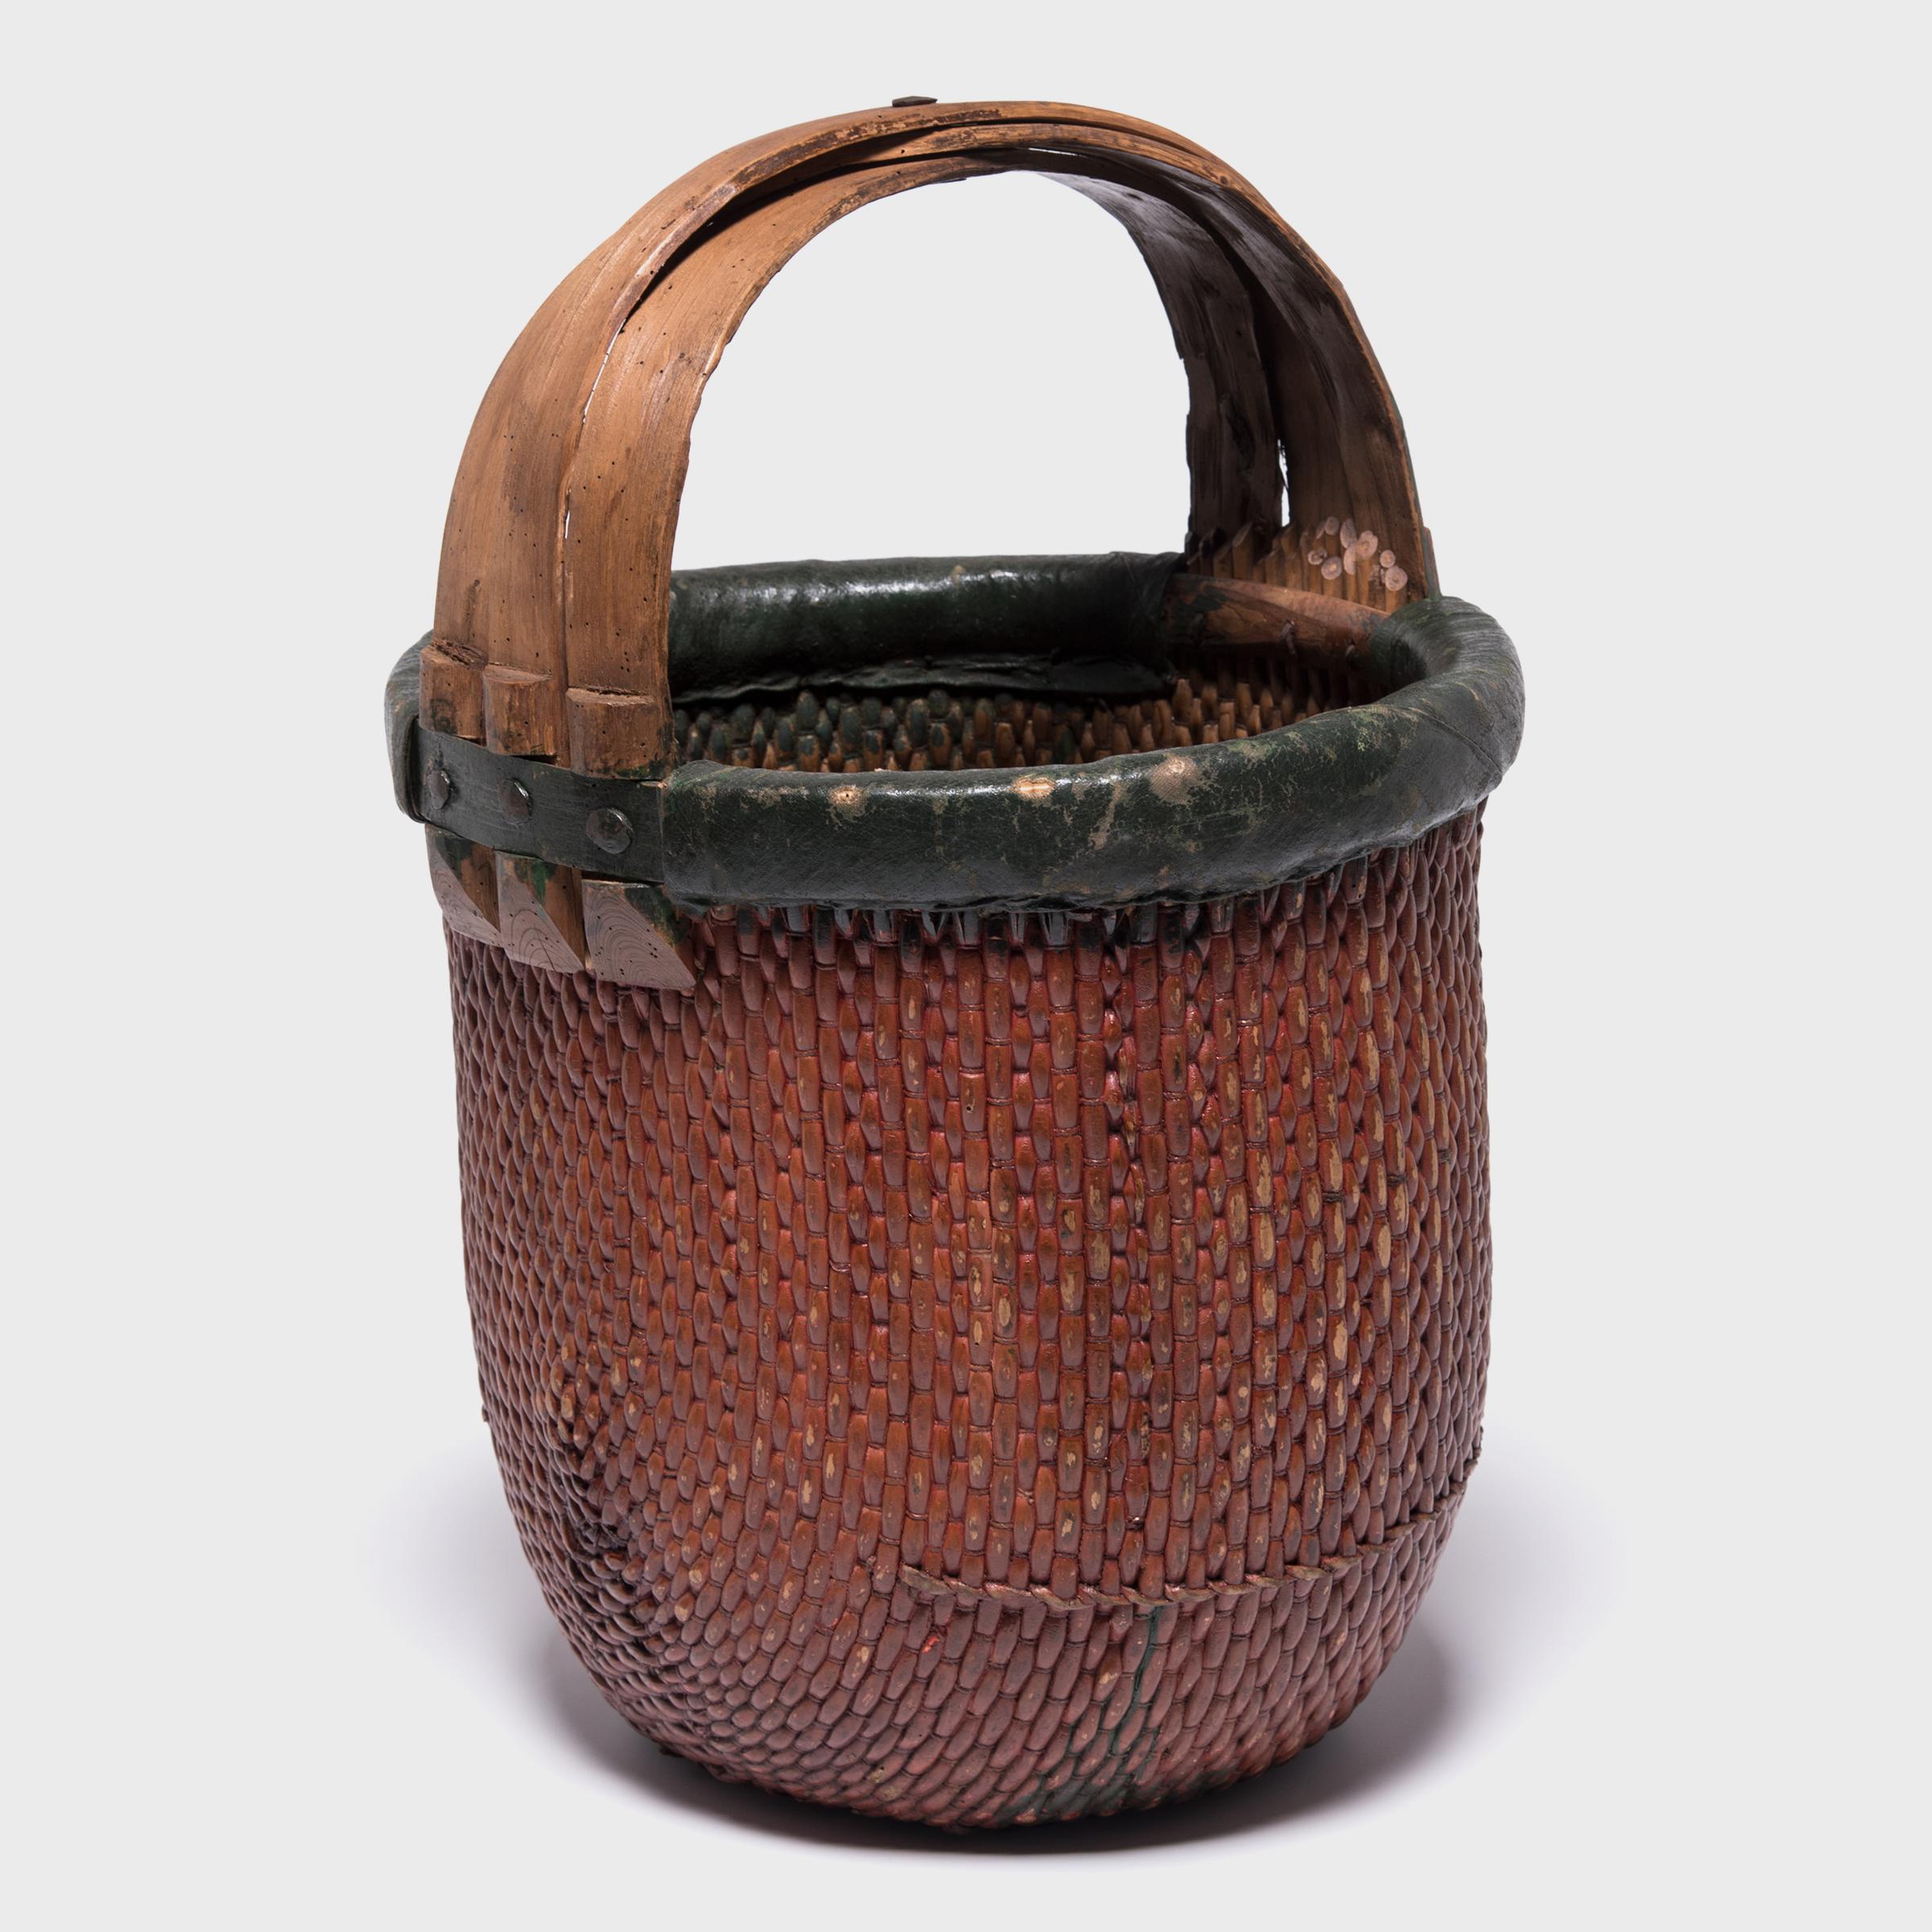 Lacquered Chinese Red Lacquer Fisherman's Basket, c. 1900